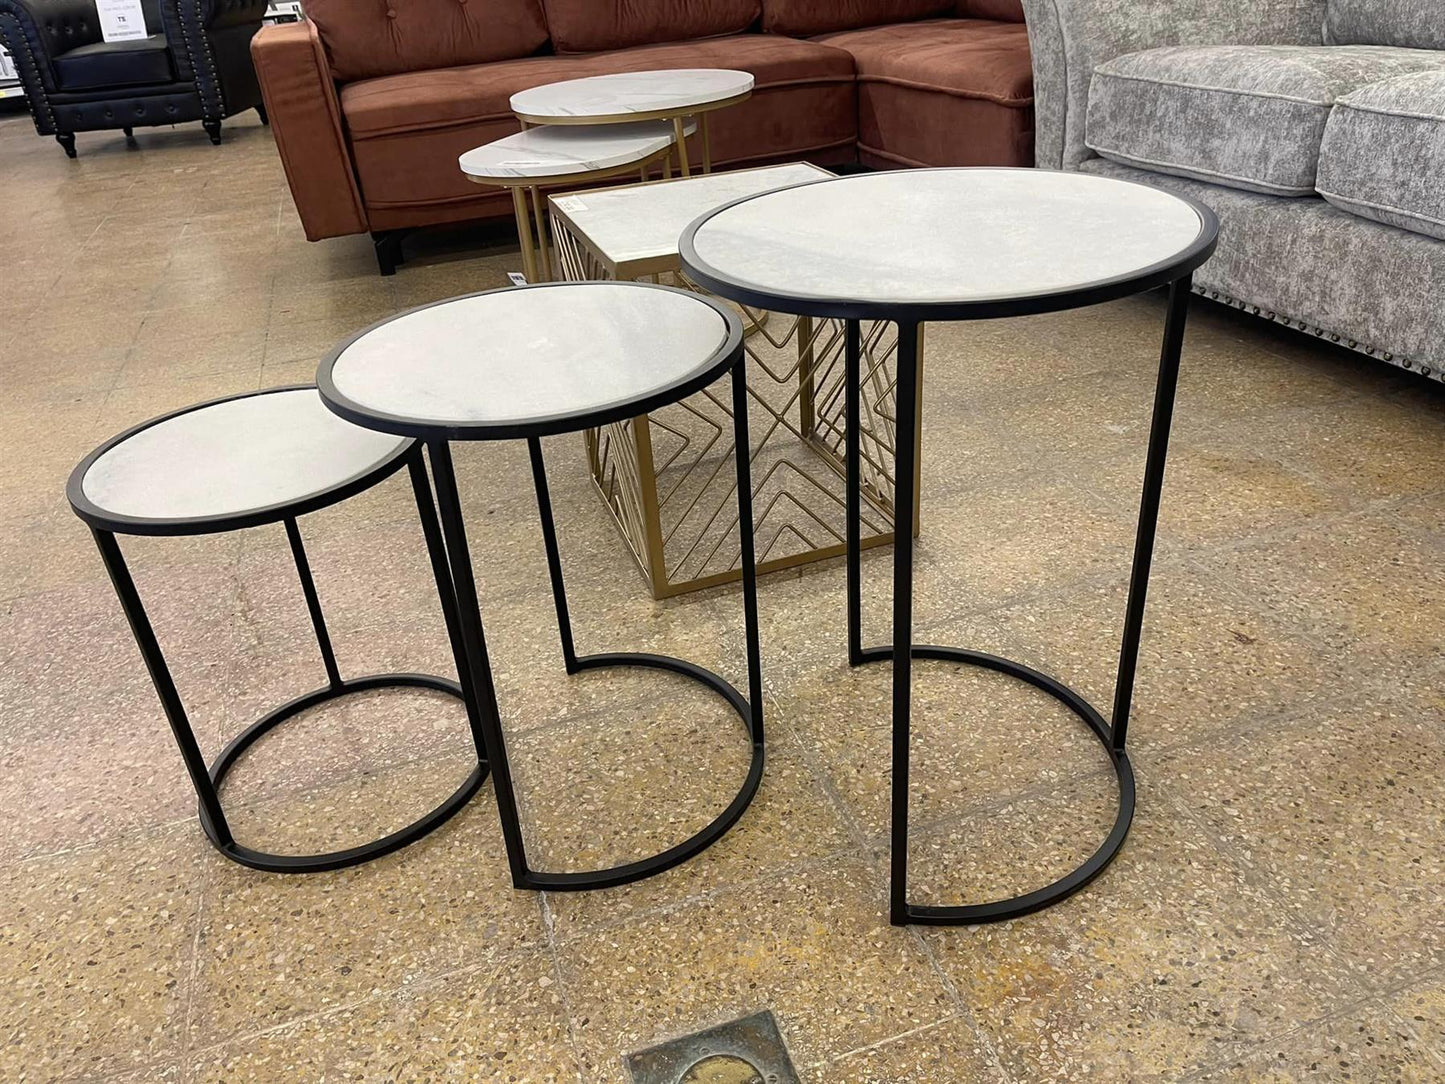 Halmore Set of 3 Marble Side Tables